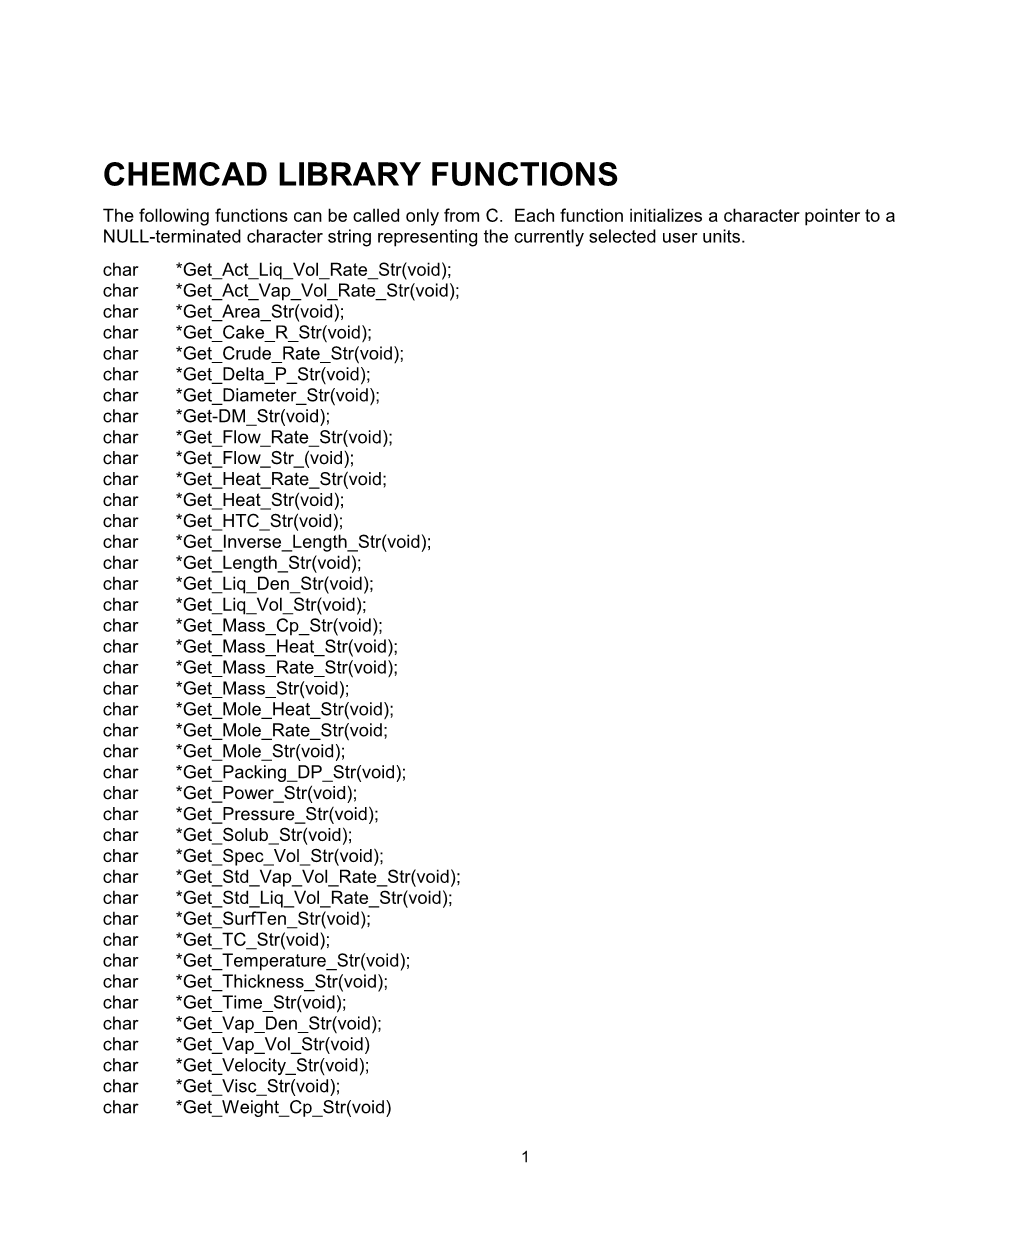 Chemcad Iii Library Functions